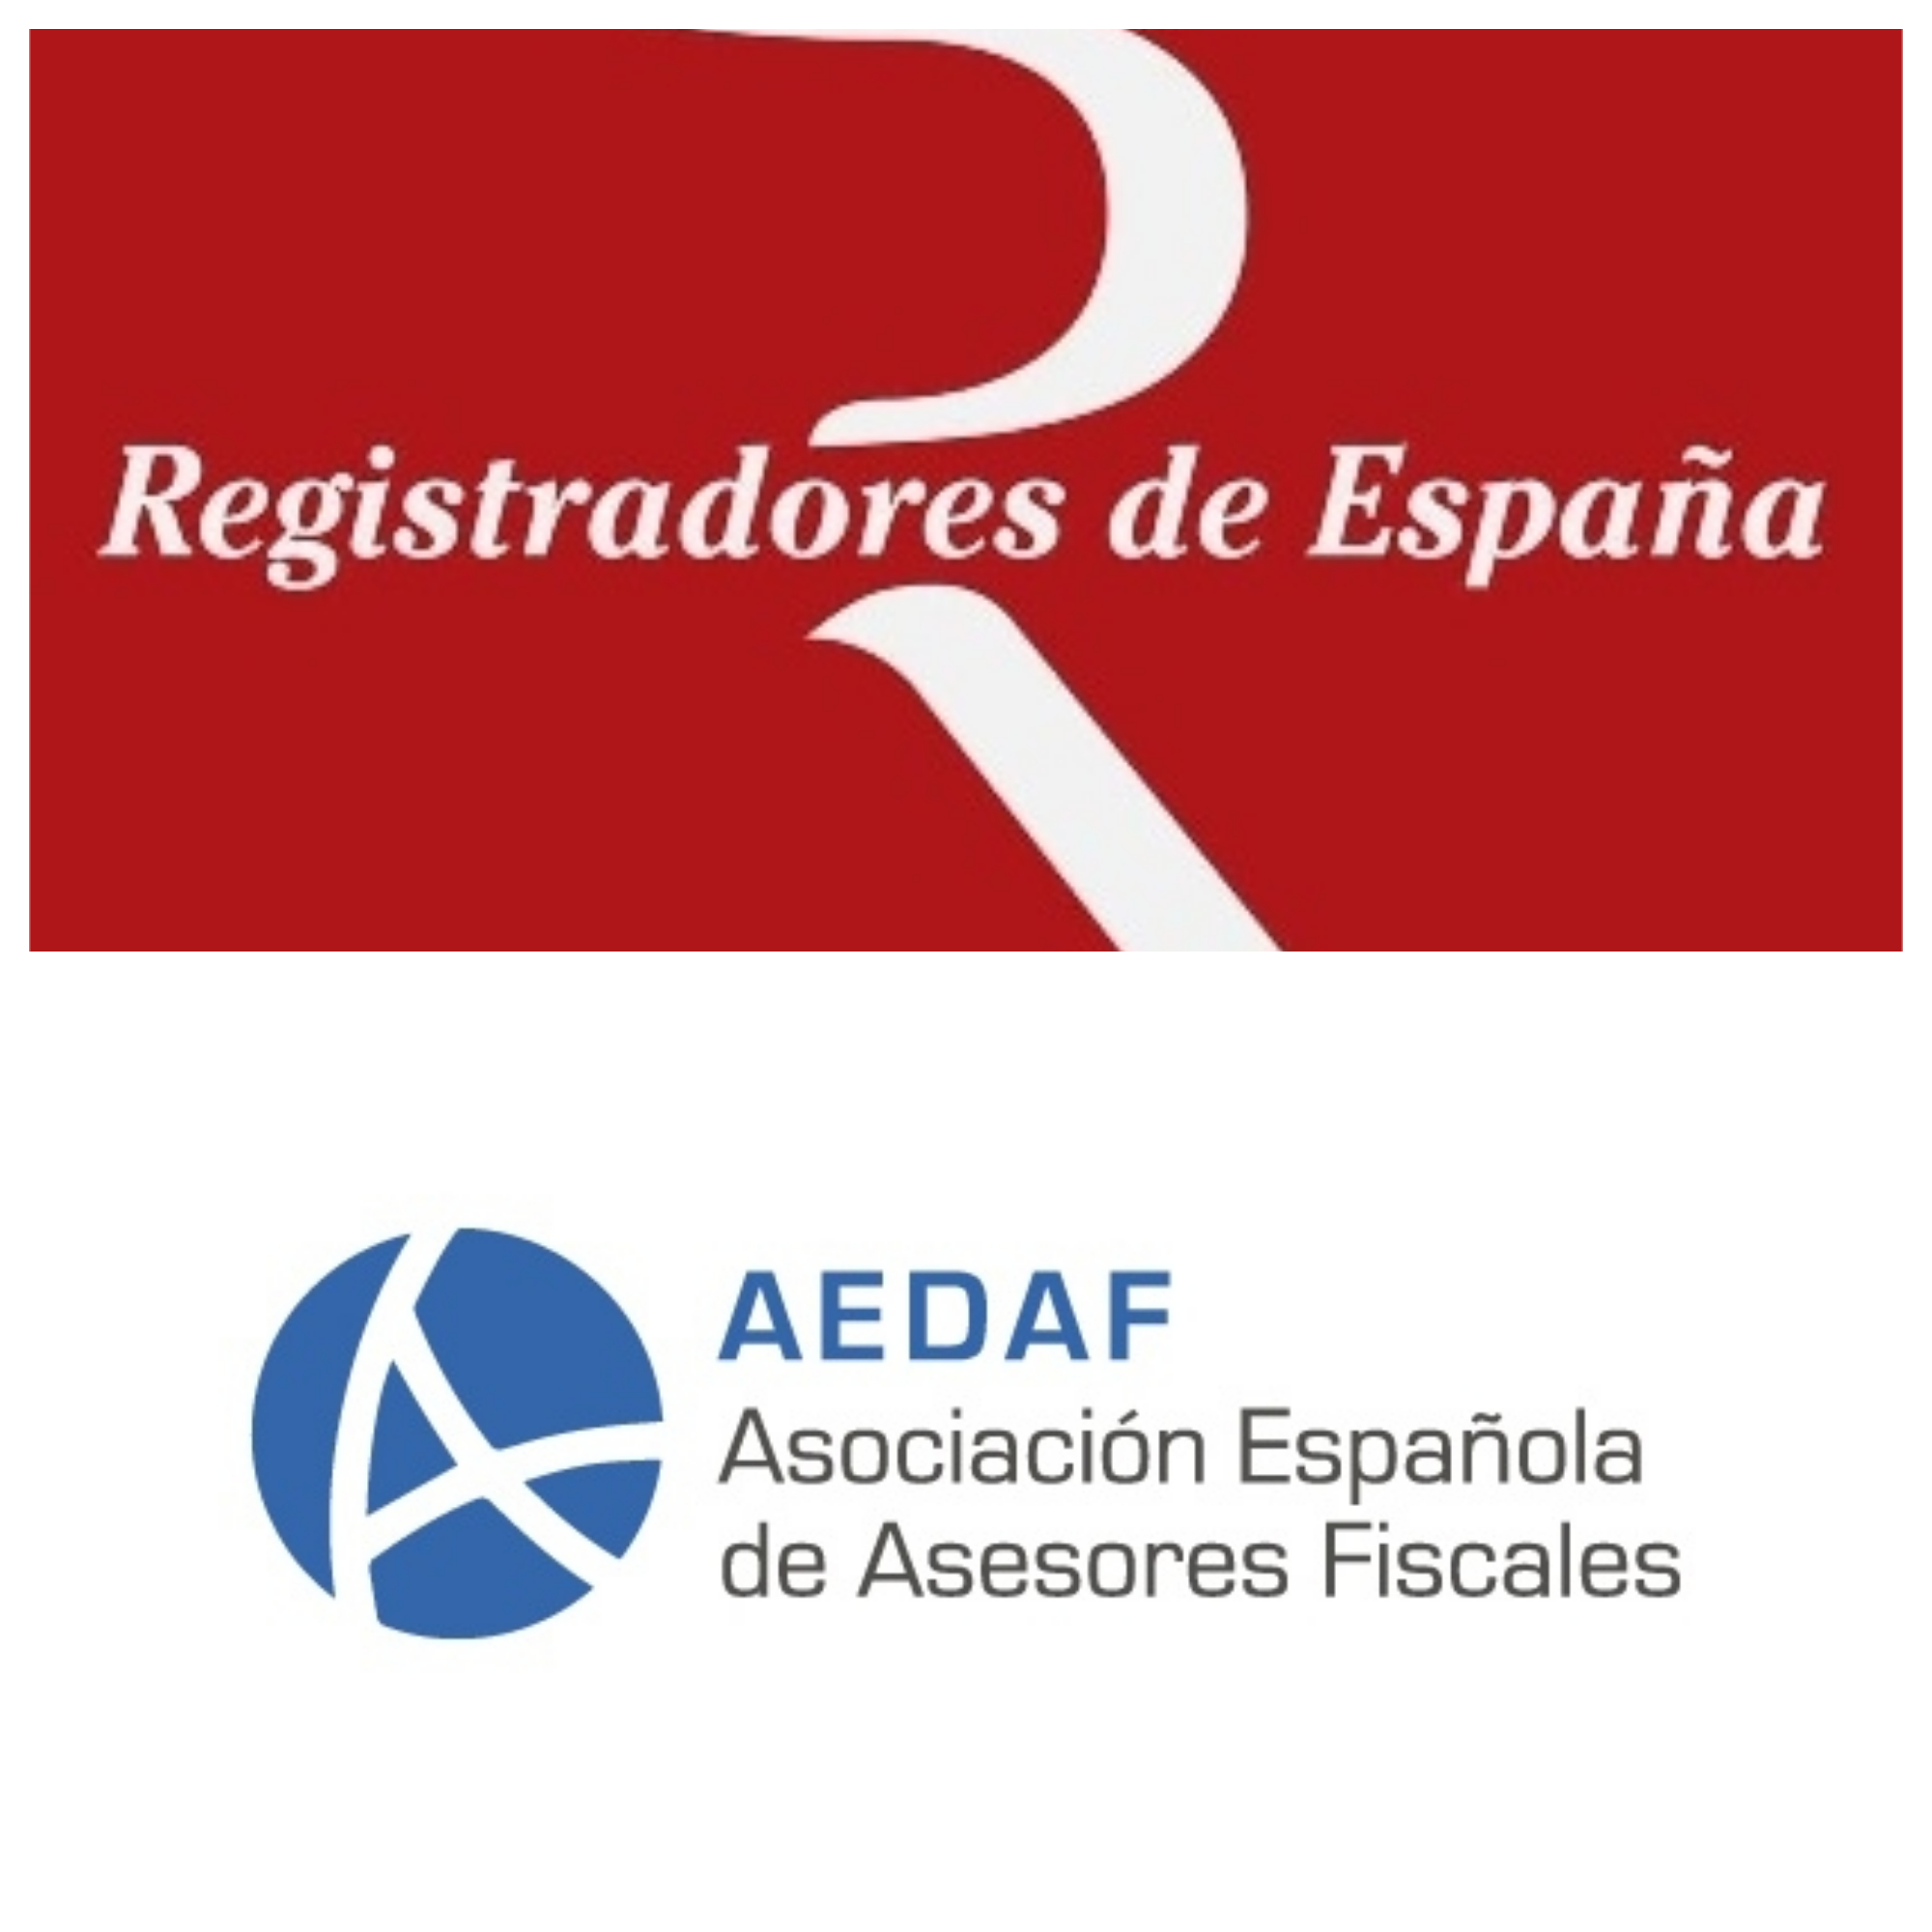 LAWERPRESS: JORDI BAQUÉS, AS REPRESENTATIVE OF AEDAF, COOPERATES WITH OFFICIAL ENTITIES IN ORGANIZING CONFERENCES REGARDING TO REAL OWNWERSHIP